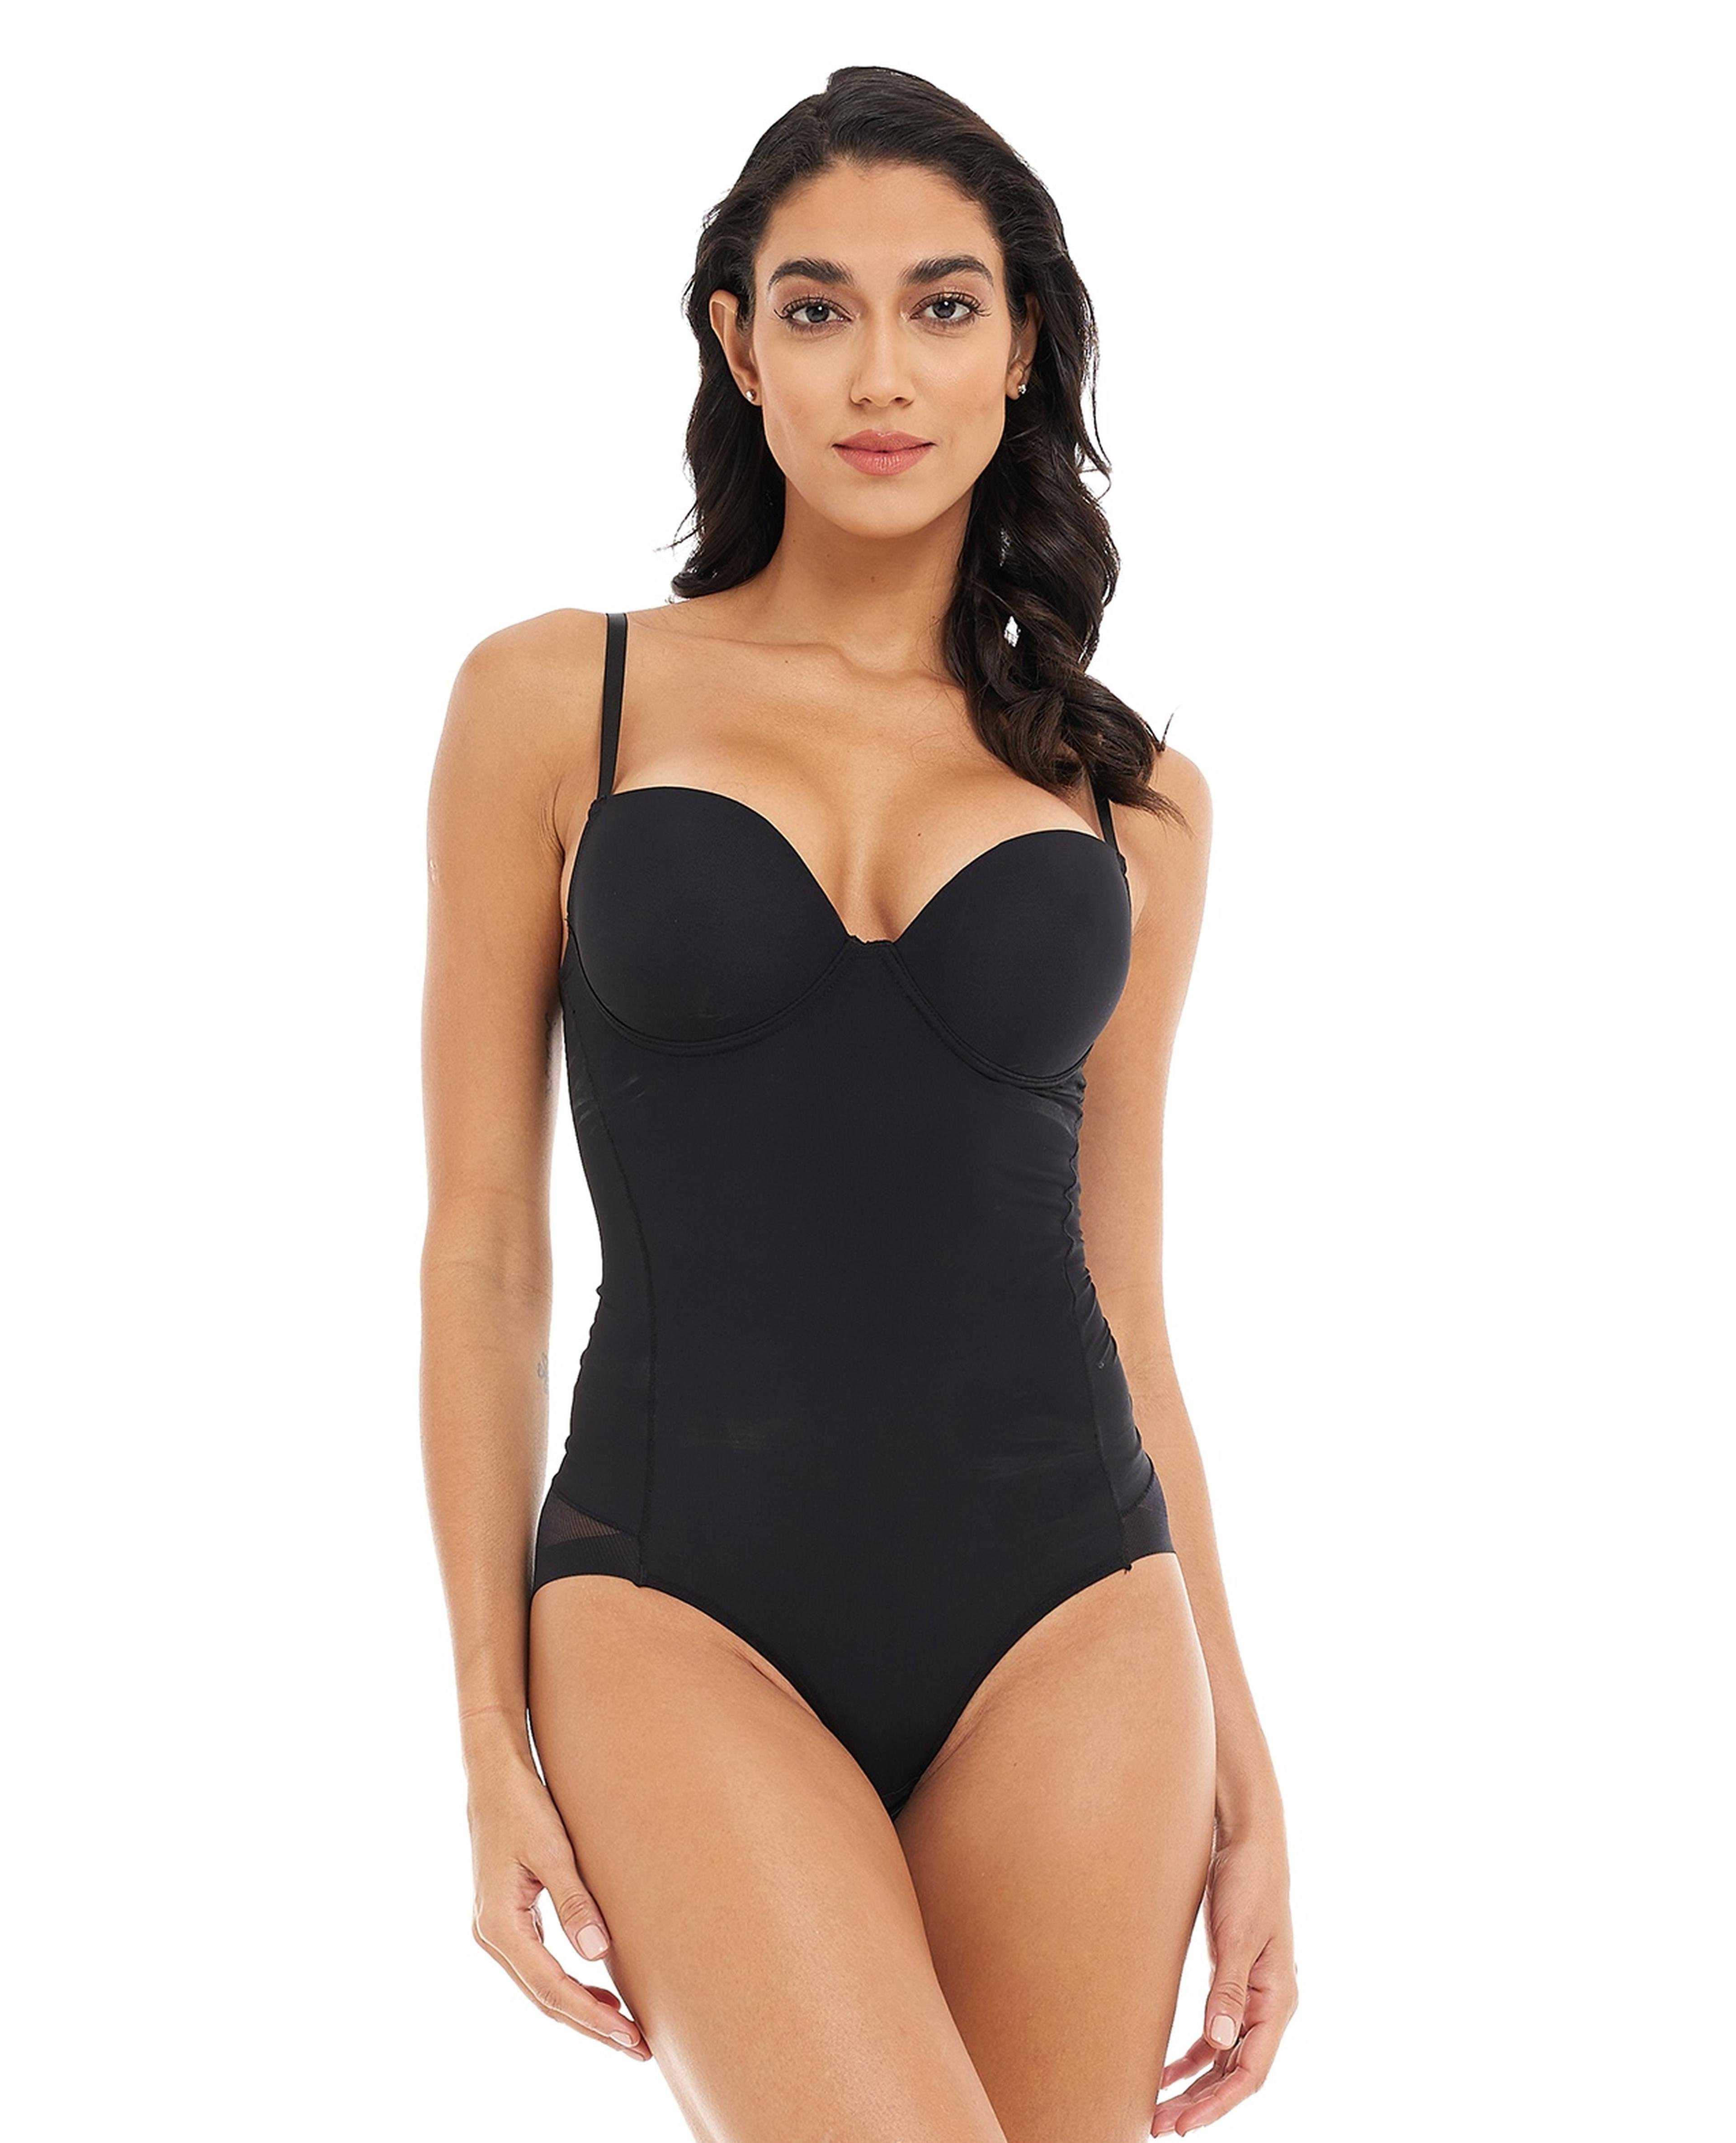 Women's Plus Size Shapewear Lightweight and Breathable Zipper-breasted  Bodysuits Tummy Control Full Body Shaper(Size:Large,Color:Black) price in  UAE,  UAE